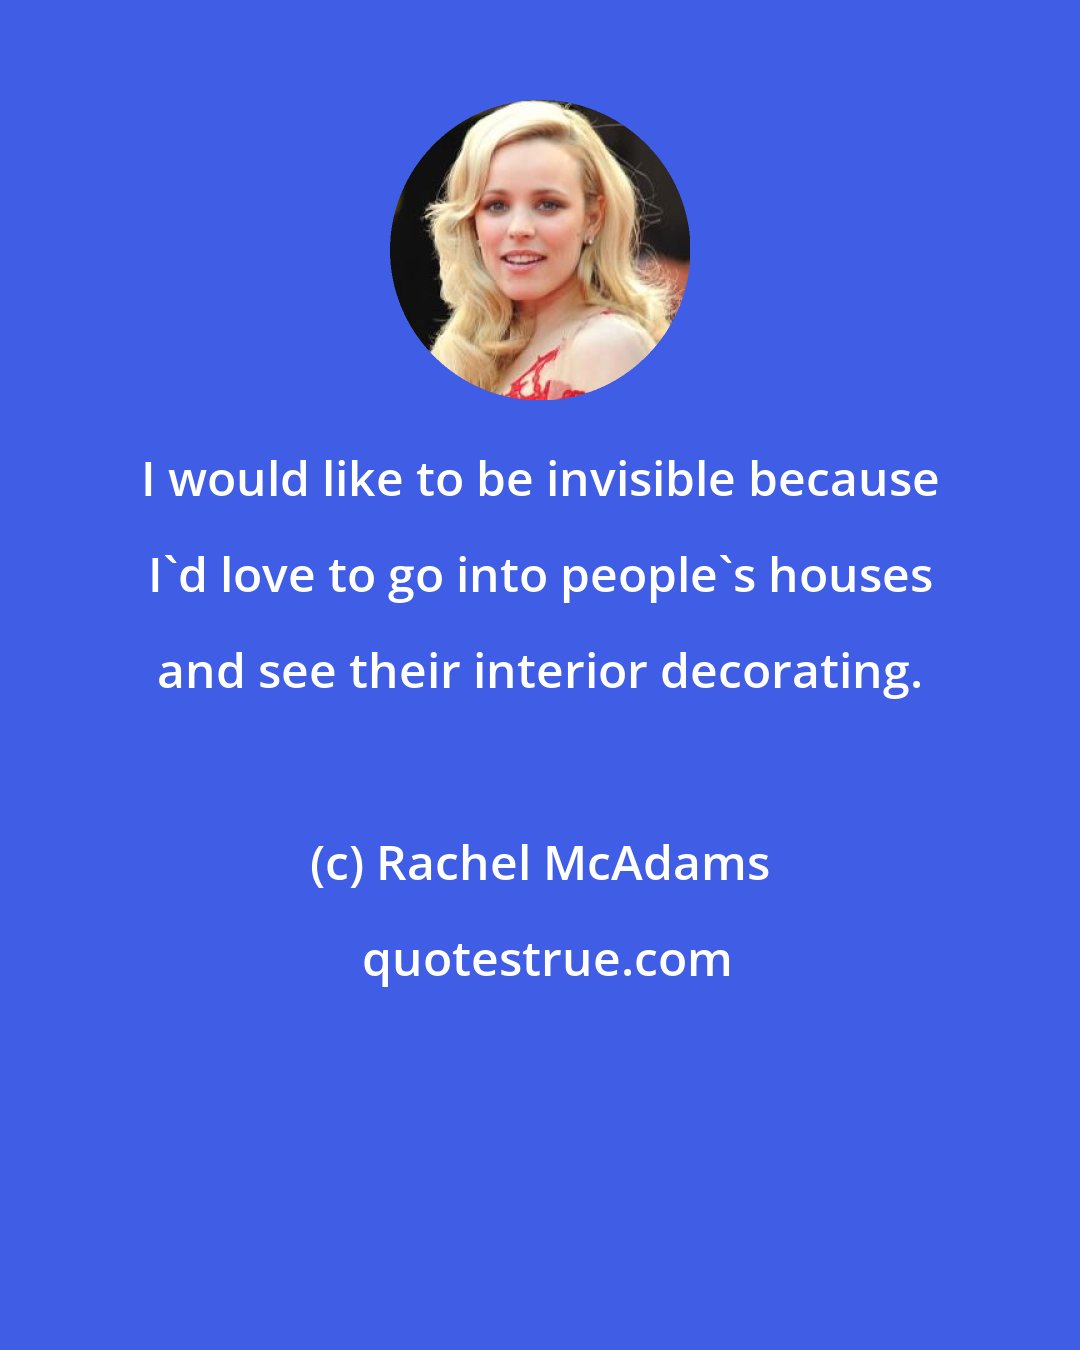 Rachel McAdams: I would like to be invisible because I'd love to go into people's houses and see their interior decorating.